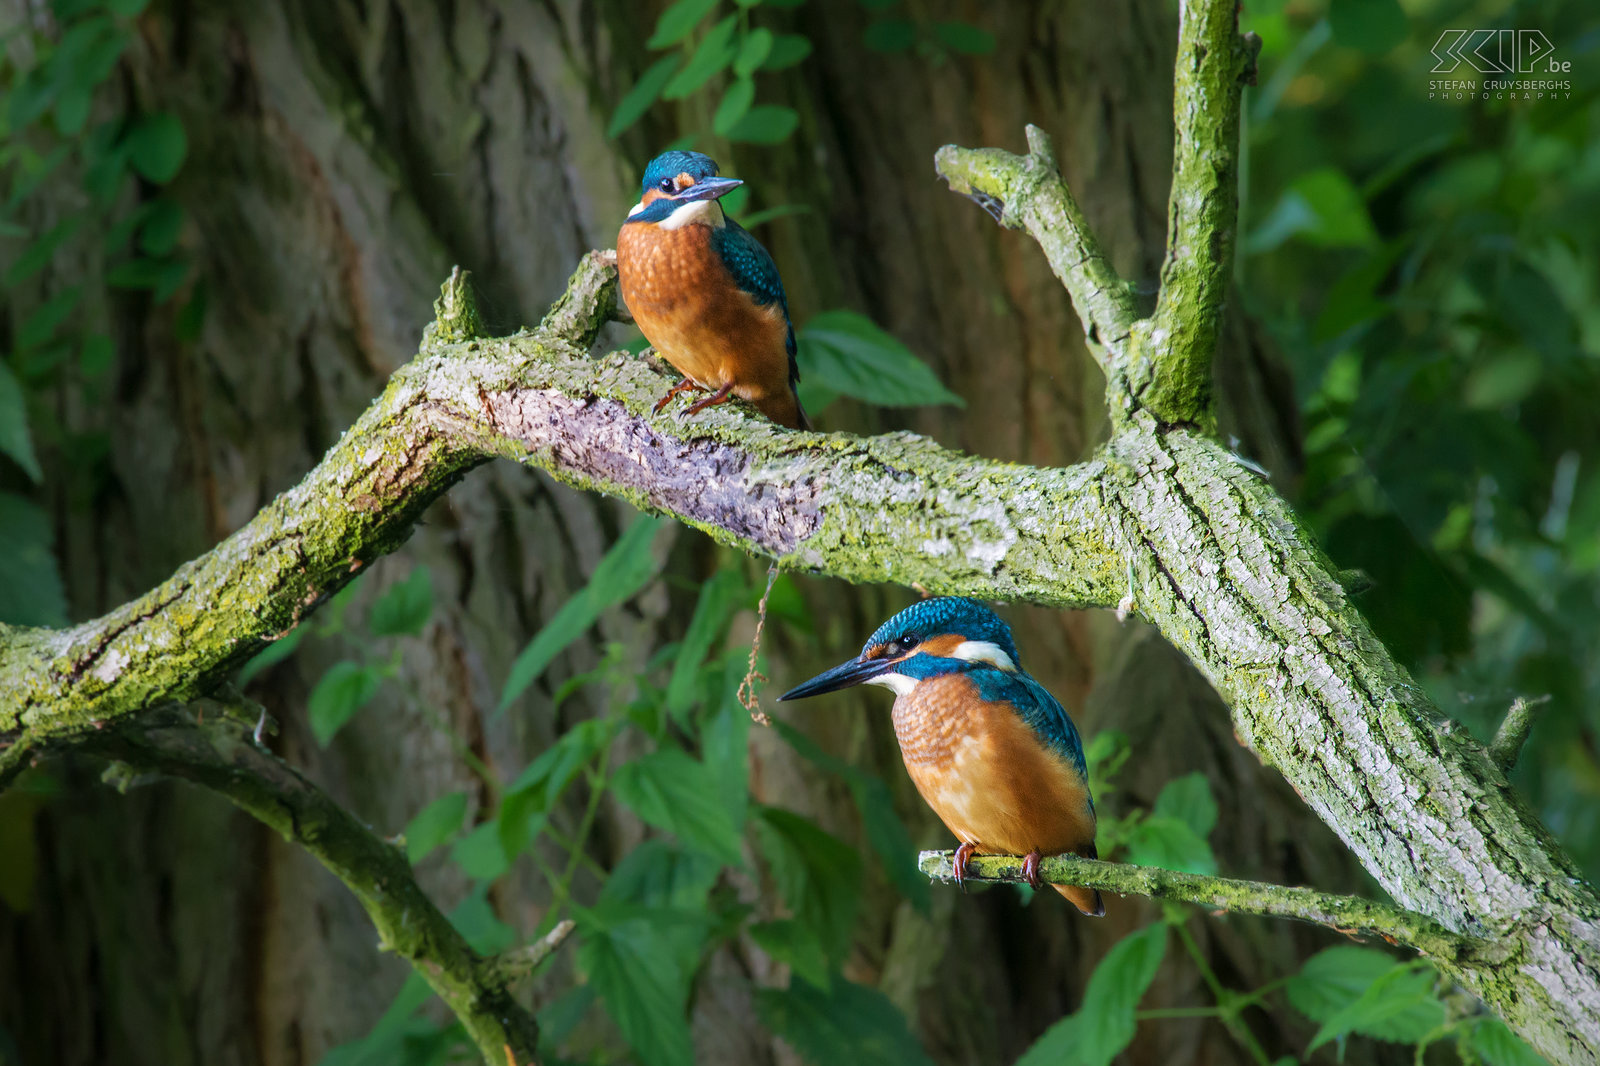 Kingfishers - Couple Finally I found a nice spot in nature my hometown Lommel where a couple of kingfishers is regularly catching fishes. The past few weeks I spent a lot of hours in the early morning near the small stream and I was able to make several good pictures of these beautiful but shy birds. The common kingfisher (alcedo atthis) is a fish-eater with a bright blue orange plumage of about 16cm long. Males are distinguished by their pitch-black lower mandible while females have a dark red spot.  Stefan Cruysberghs